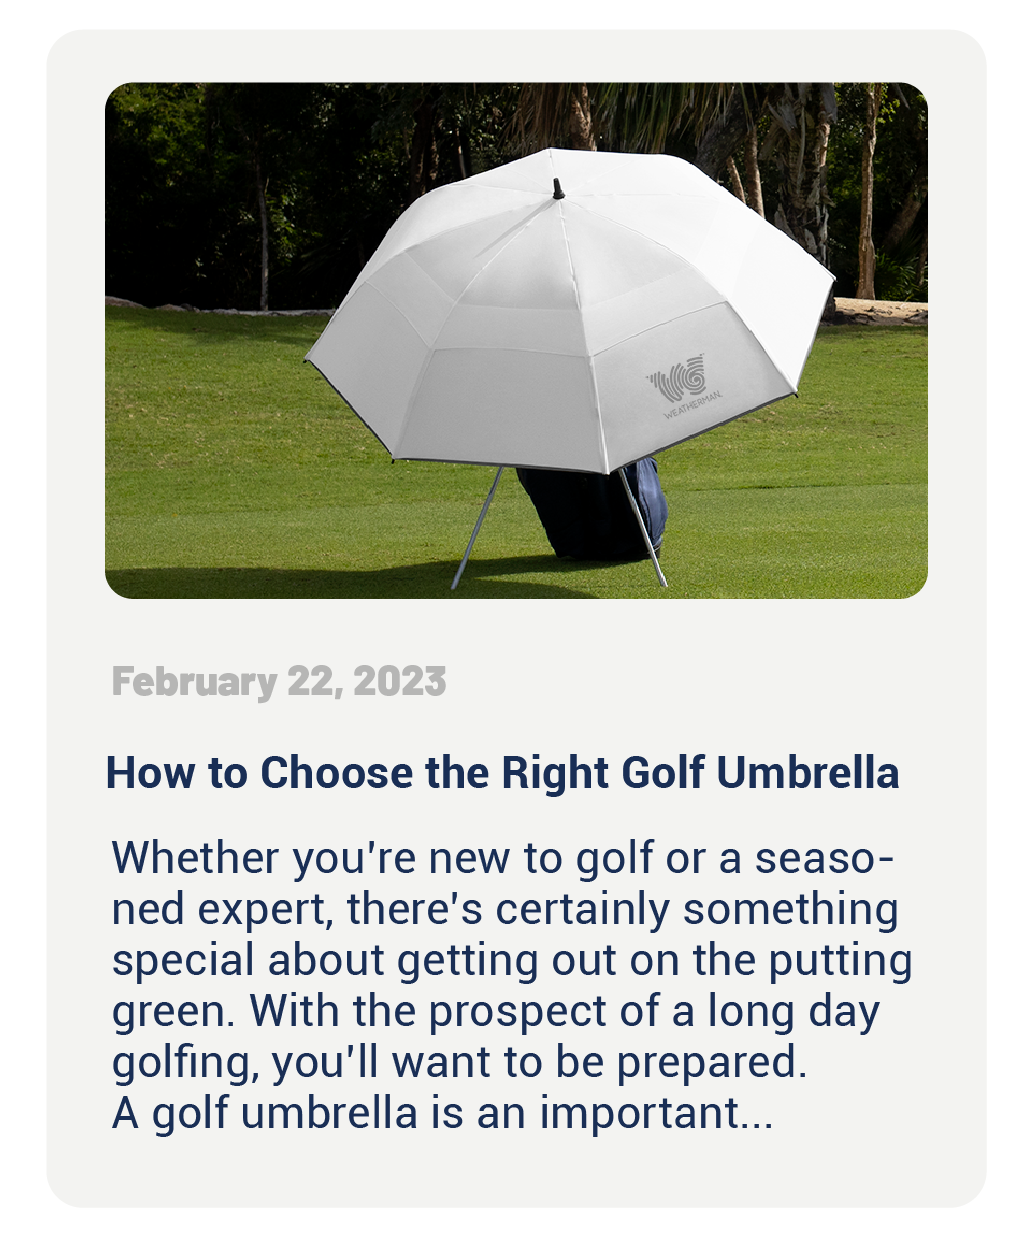 How to choose the right golf umbrella